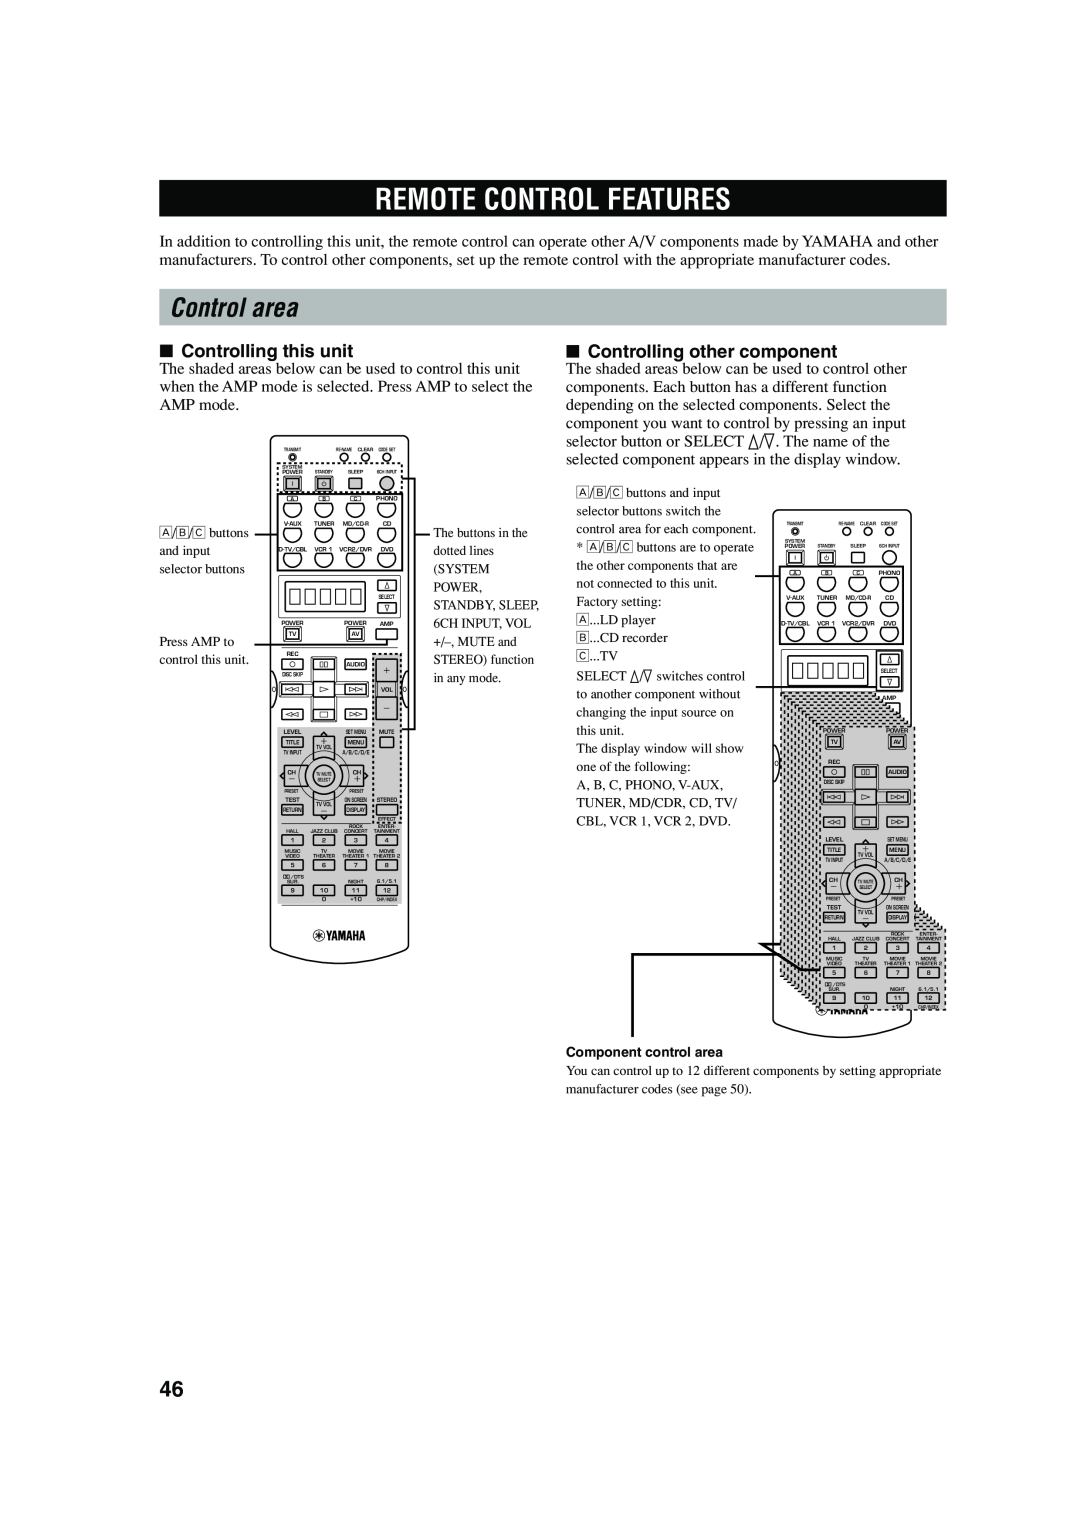 Yamaha RX-V740 owner manual Remote Control Features, Control area, Controlling this unit, Controlling other component 